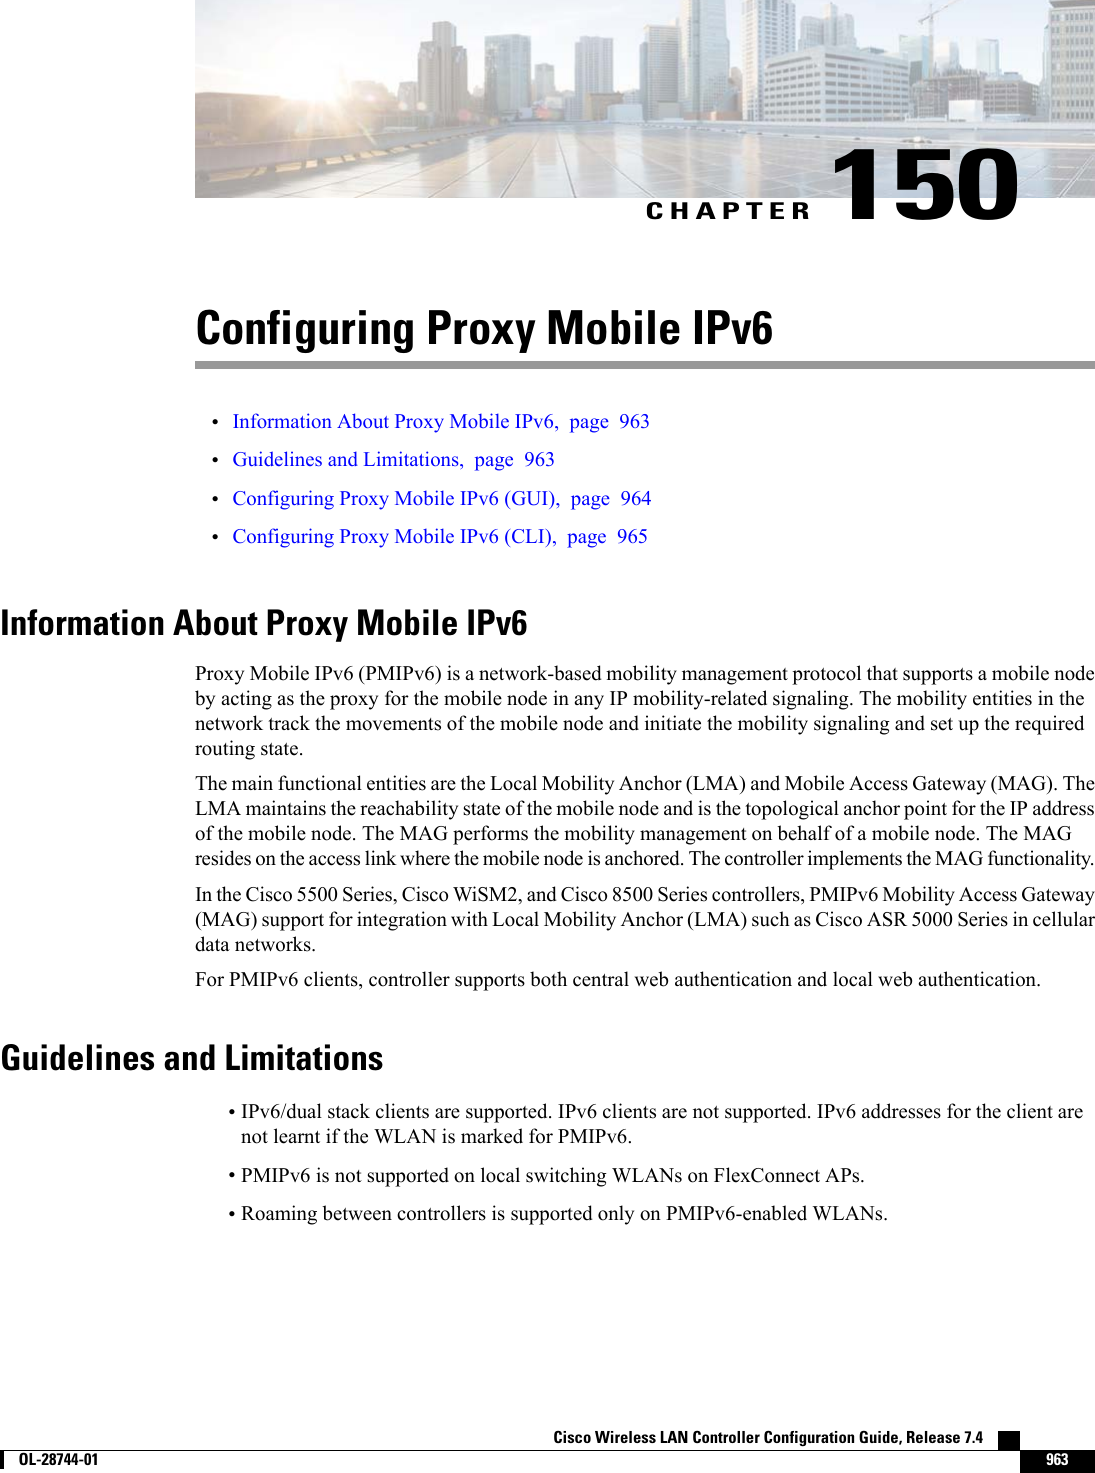 CHAPTER 150Configuring Proxy Mobile IPv6•Information About Proxy Mobile IPv6, page 963•Guidelines and Limitations, page 963•Configuring Proxy Mobile IPv6 (GUI), page 964•Configuring Proxy Mobile IPv6 (CLI), page 965Information About Proxy Mobile IPv6Proxy Mobile IPv6 (PMIPv6) is a network-based mobility management protocol that supports a mobile nodeby acting as the proxy for the mobile node in any IP mobility-related signaling. The mobility entities in thenetwork track the movements of the mobile node and initiate the mobility signaling and set up the requiredrouting state.The main functional entities are the Local Mobility Anchor (LMA) and Mobile Access Gateway (MAG). TheLMA maintains the reachability state of the mobile node and is the topological anchor point for the IP addressof the mobile node. The MAG performs the mobility management on behalf of a mobile node. The MAGresides on the access link where the mobile node is anchored. The controller implements the MAG functionality.In the Cisco 5500 Series, Cisco WiSM2, and Cisco 8500 Series controllers, PMIPv6 Mobility Access Gateway(MAG) support for integration with Local Mobility Anchor (LMA) such as Cisco ASR 5000 Series in cellulardata networks.For PMIPv6 clients, controller supports both central web authentication and local web authentication.Guidelines and Limitations•IPv6/dual stack clients are supported. IPv6 clients are not supported. IPv6 addresses for the client arenot learnt if the WLAN is marked for PMIPv6.•PMIPv6 is not supported on local switching WLANs on FlexConnect APs.•Roaming between controllers is supported only on PMIPv6-enabled WLANs.Cisco Wireless LAN Controller Configuration Guide, Release 7.4        OL-28744-01 963